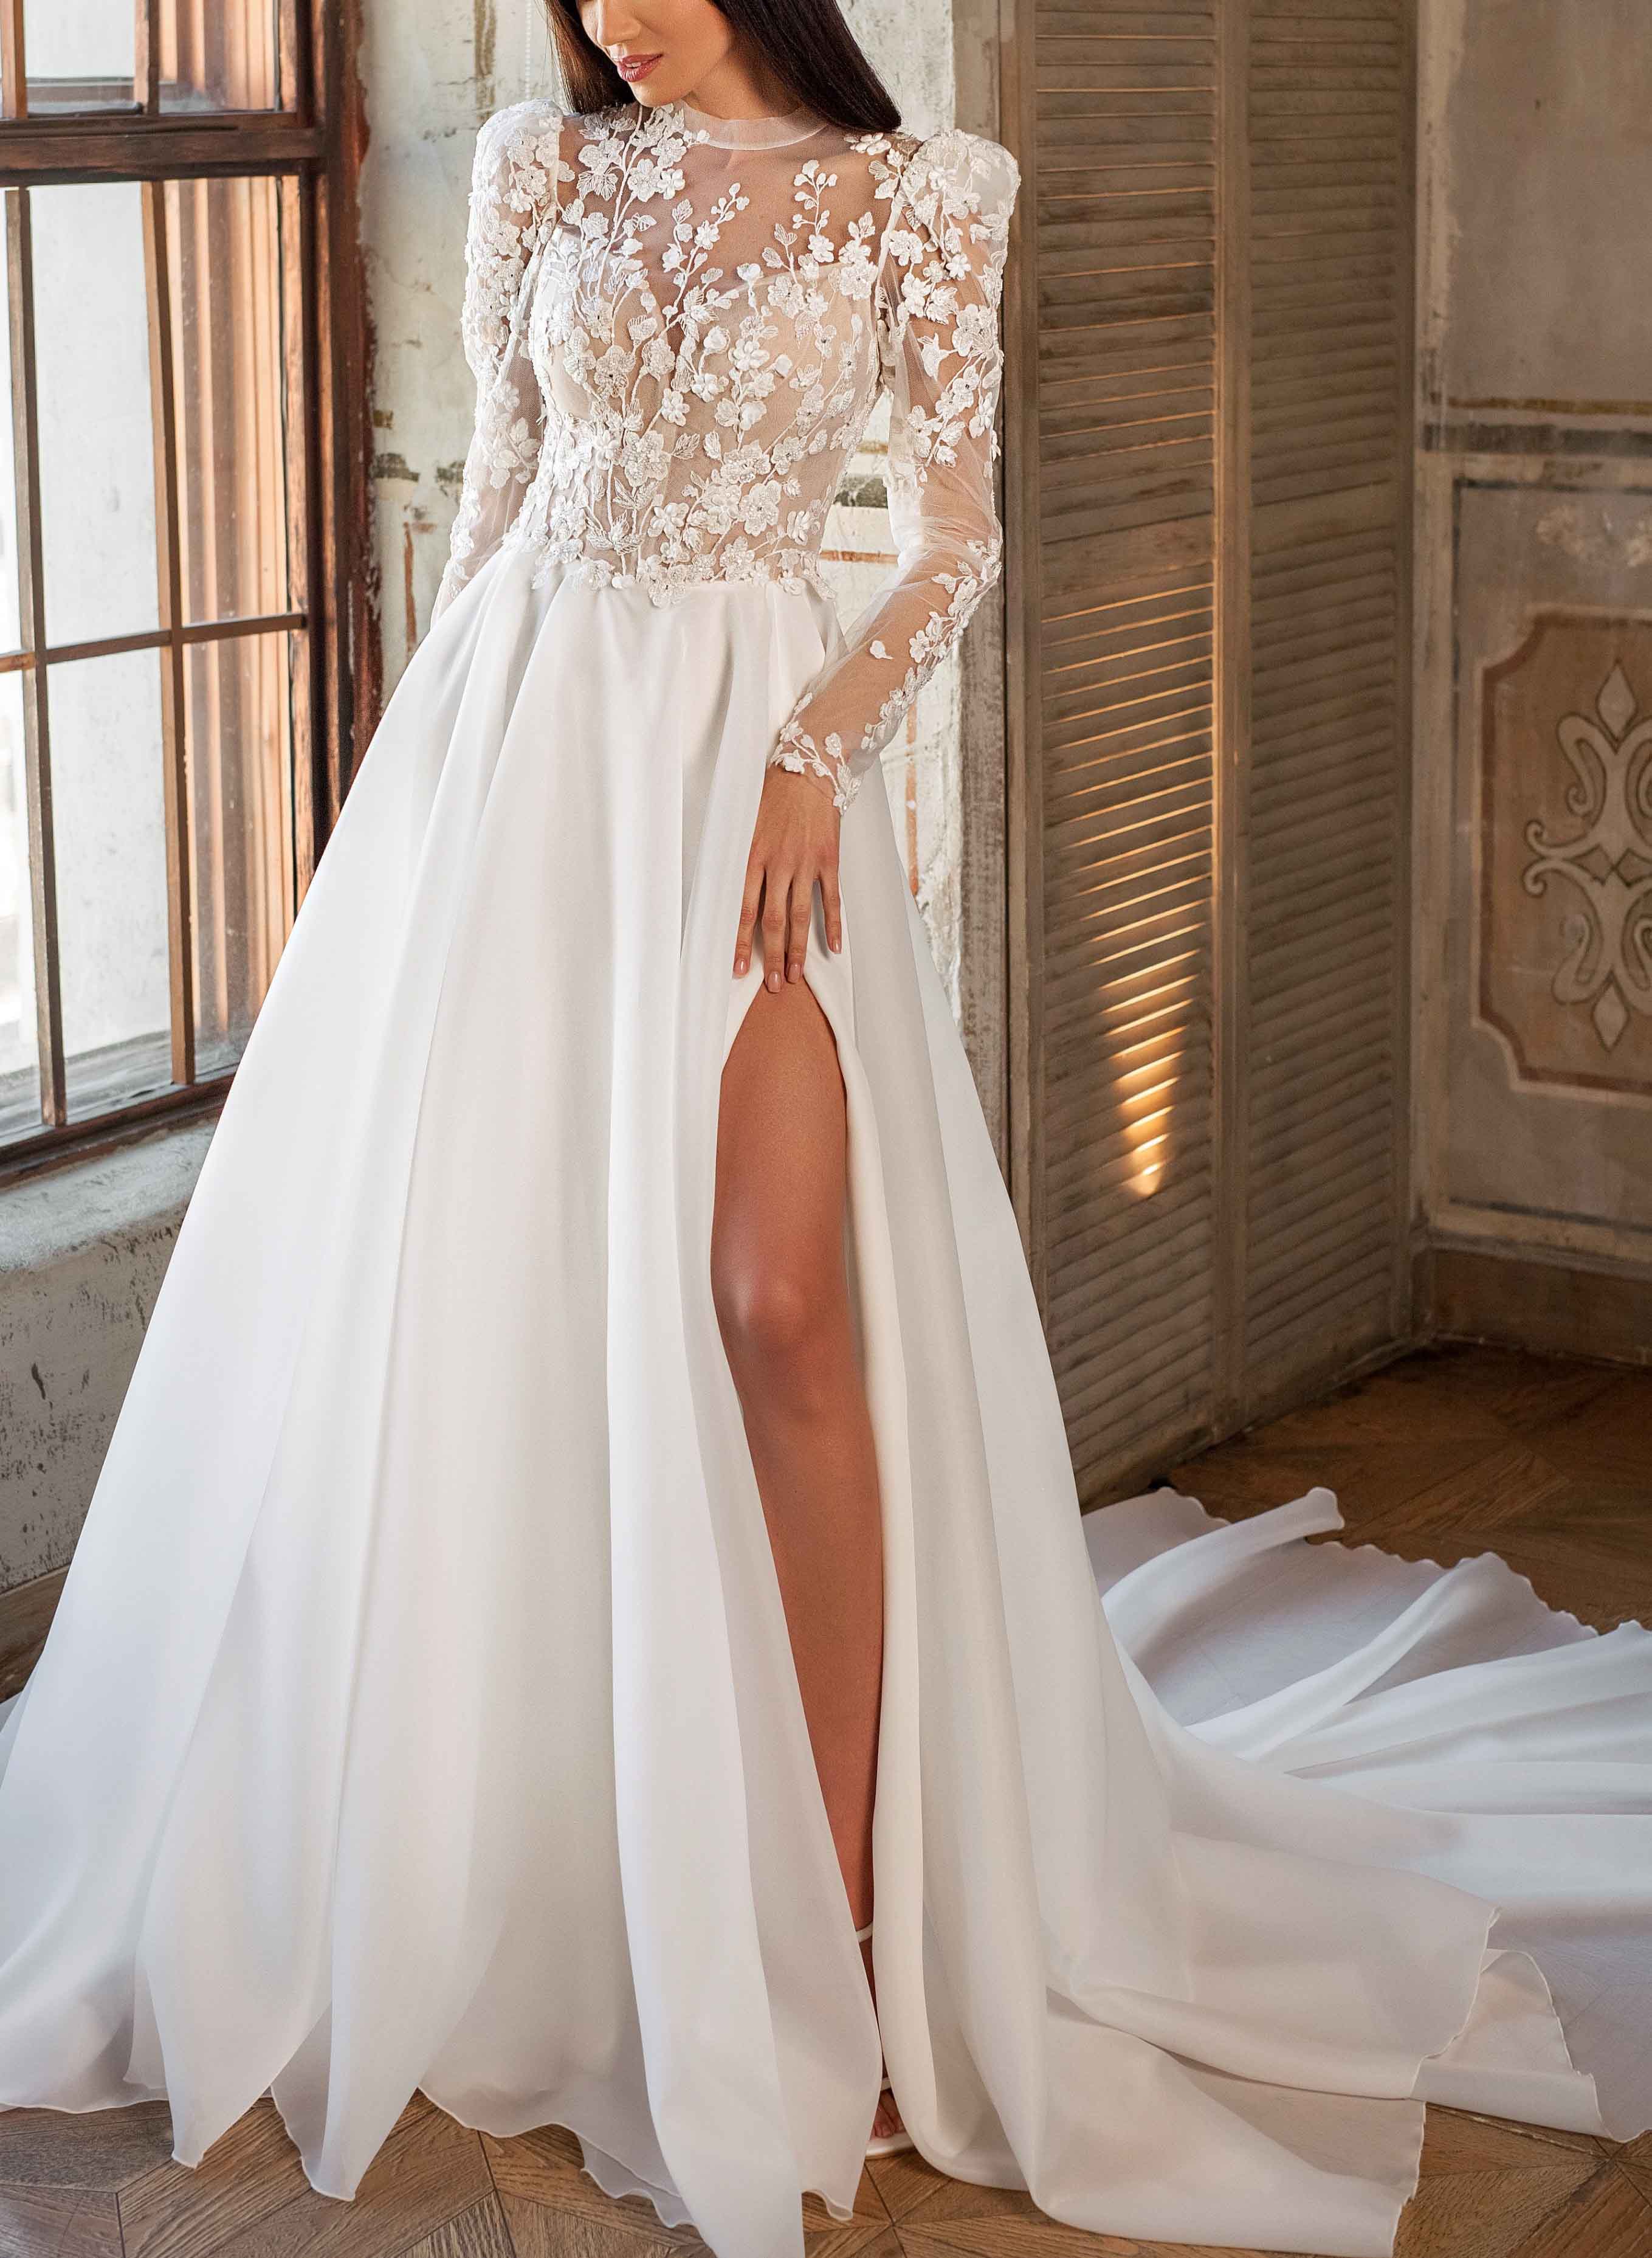 Lace Long Sleeves High Neck Wedding Dresses With Organza